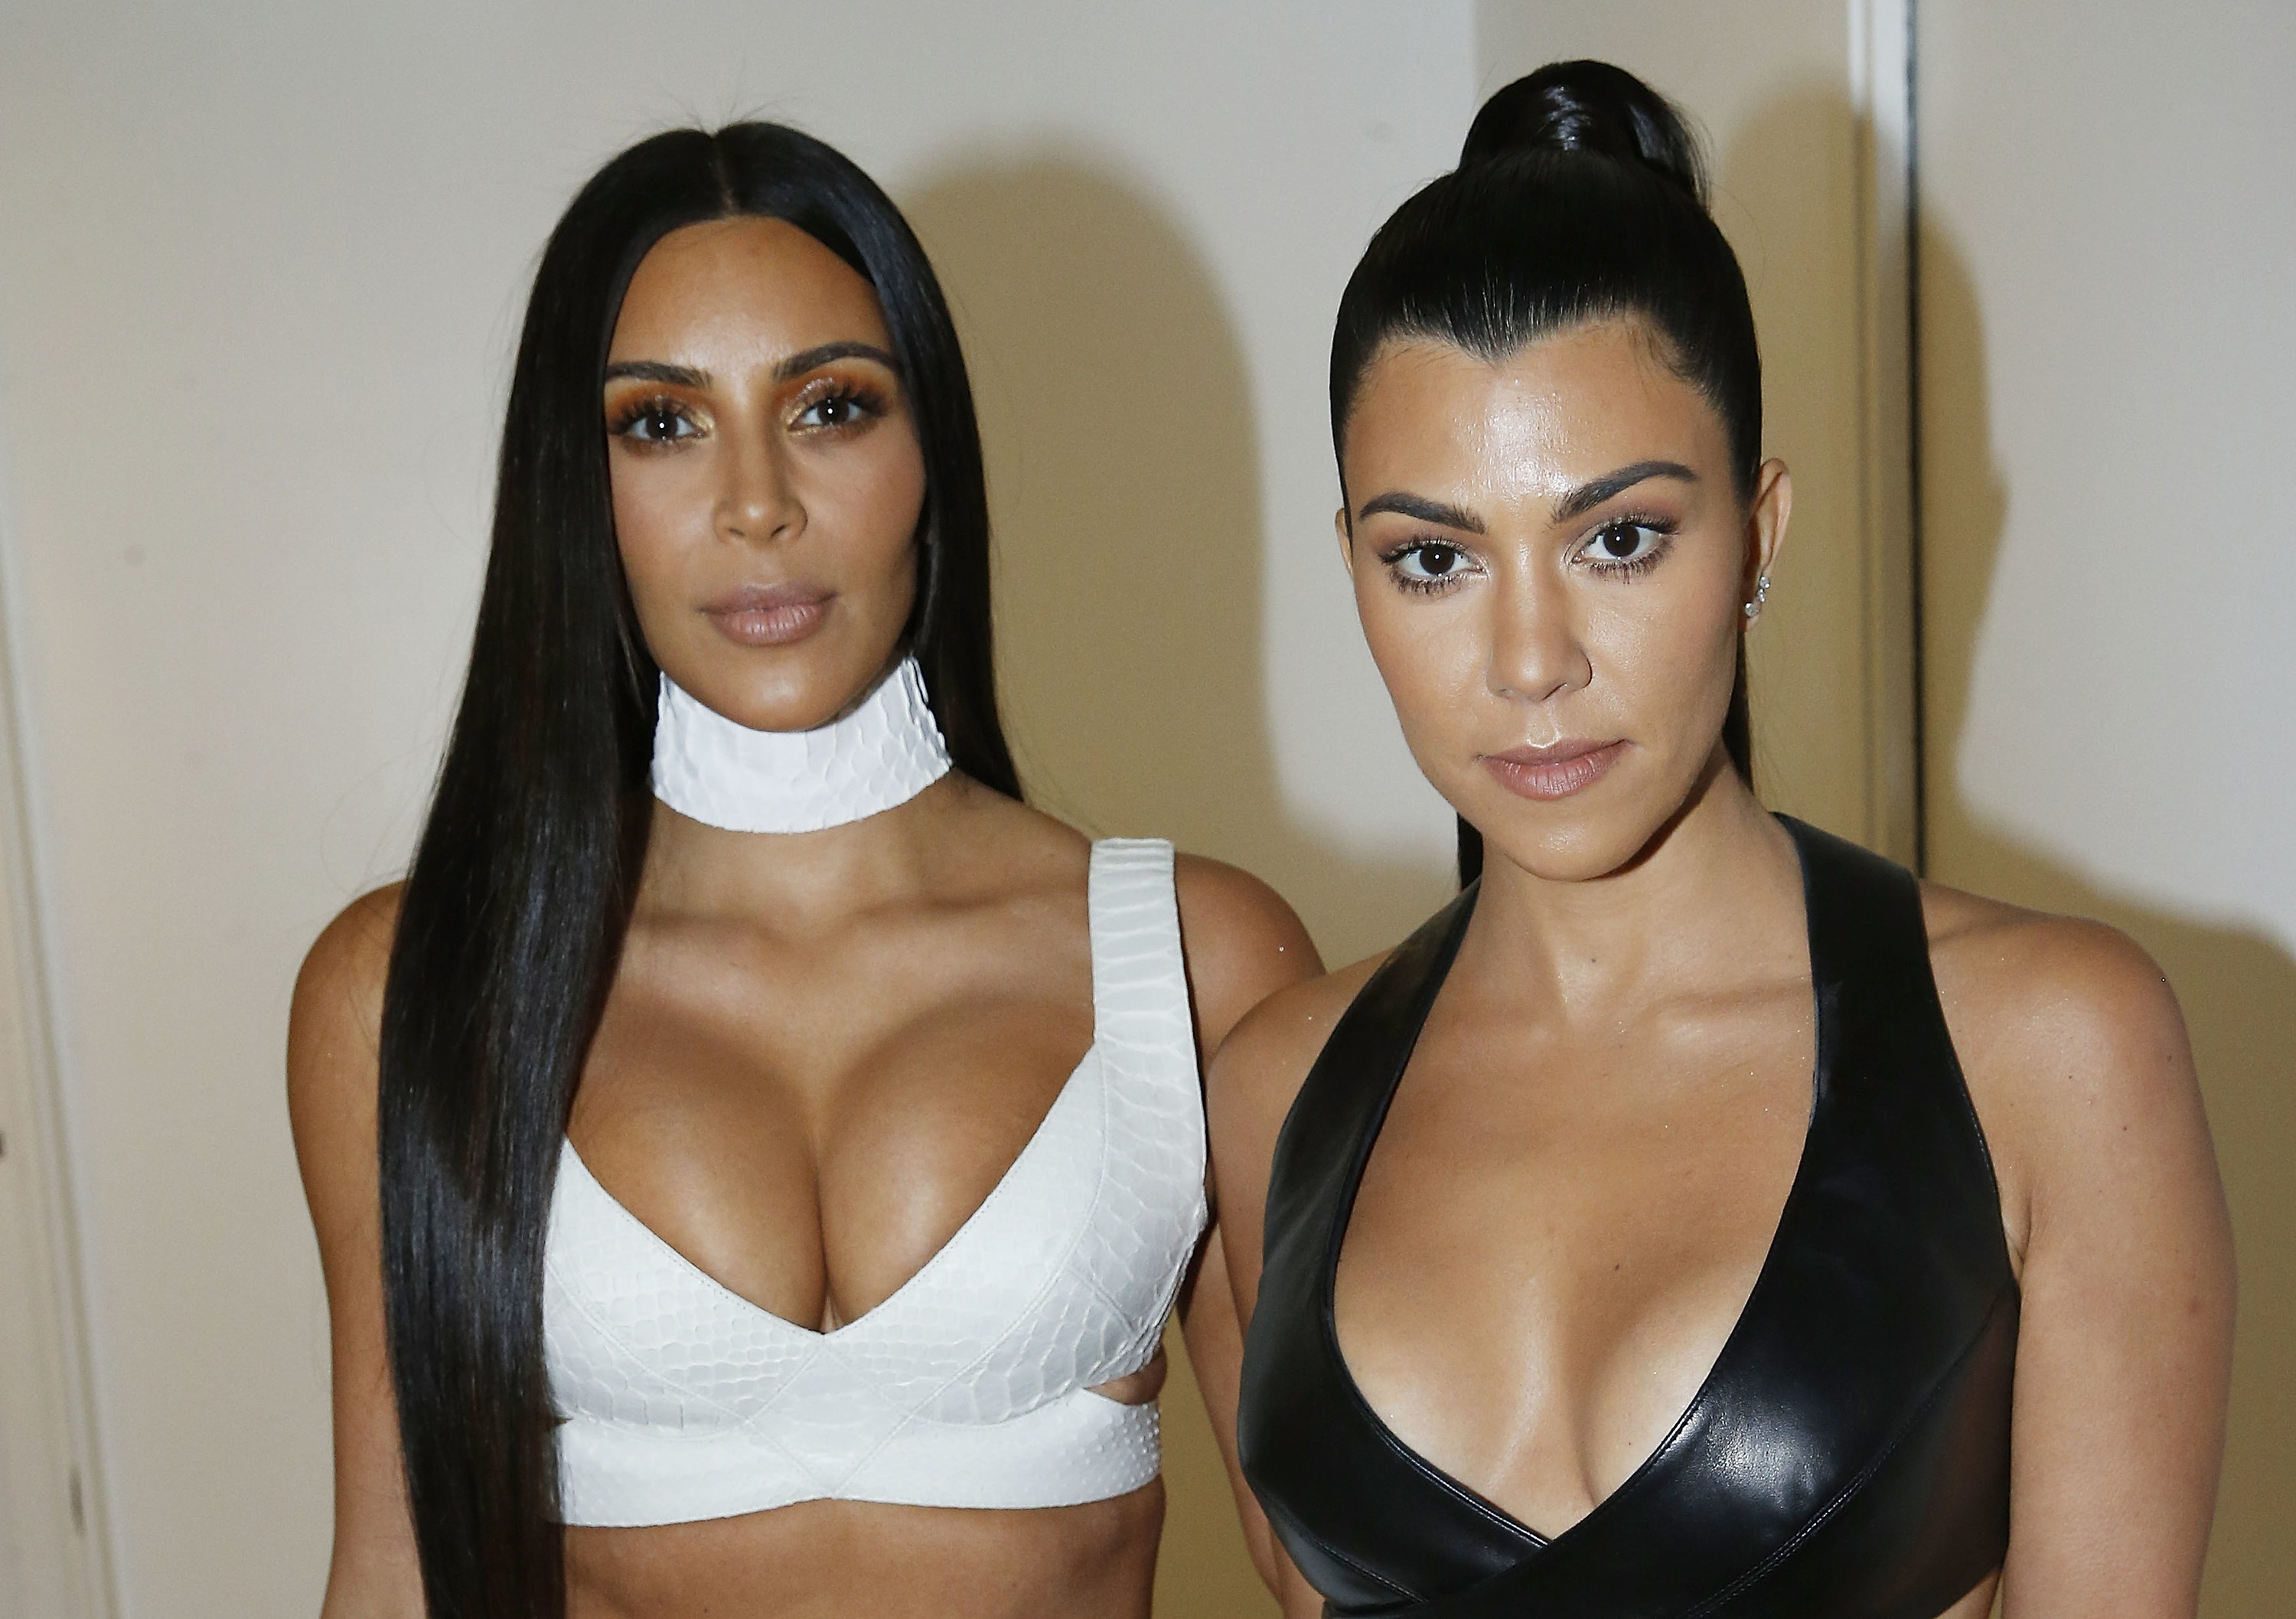 Kim and Kourtney standing together and wearing bra-type tops